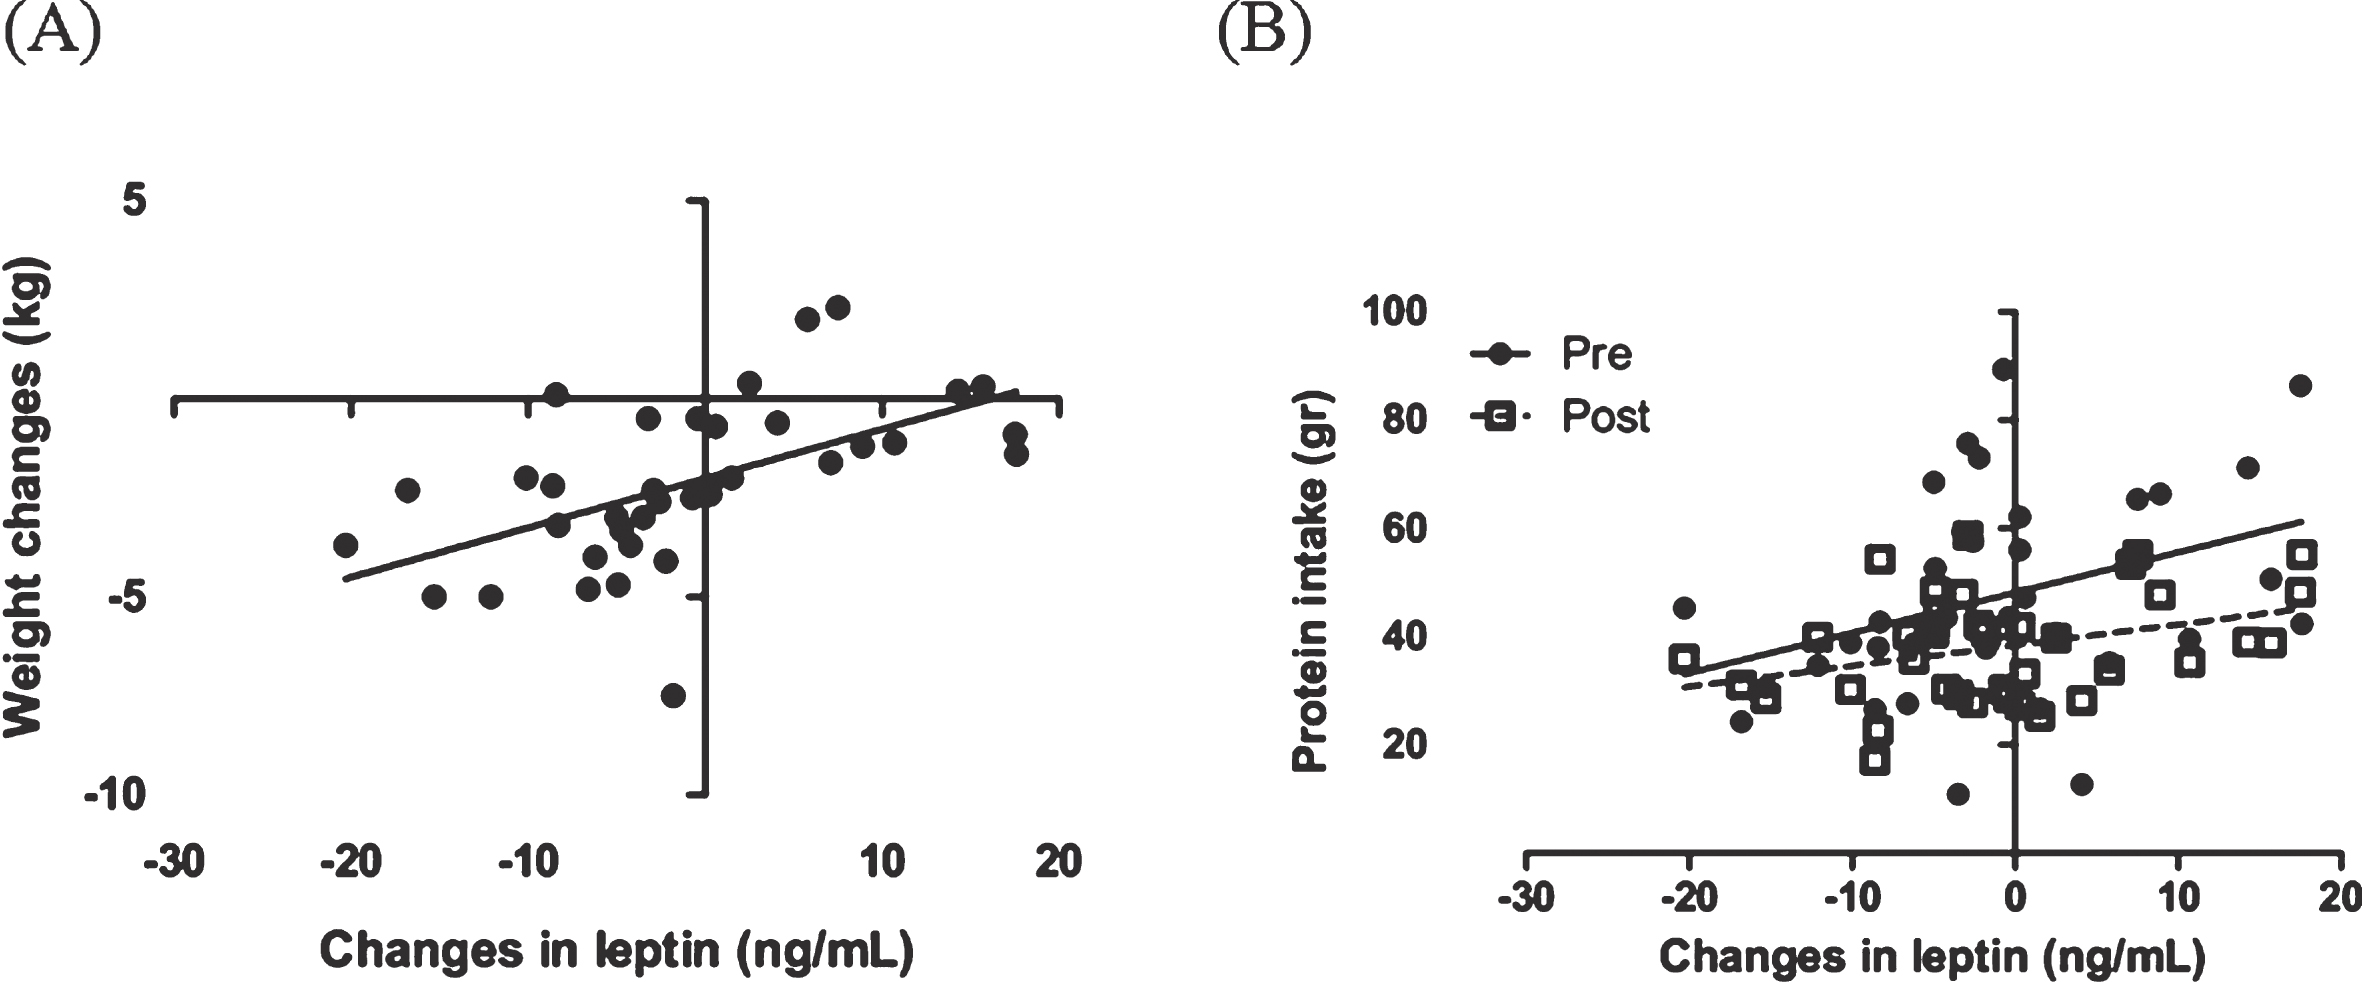 Correlation between changes in leptin, body weight (A) and protein intake (B) before and after the intervention. The analysis was done using a Pearson correlation test.